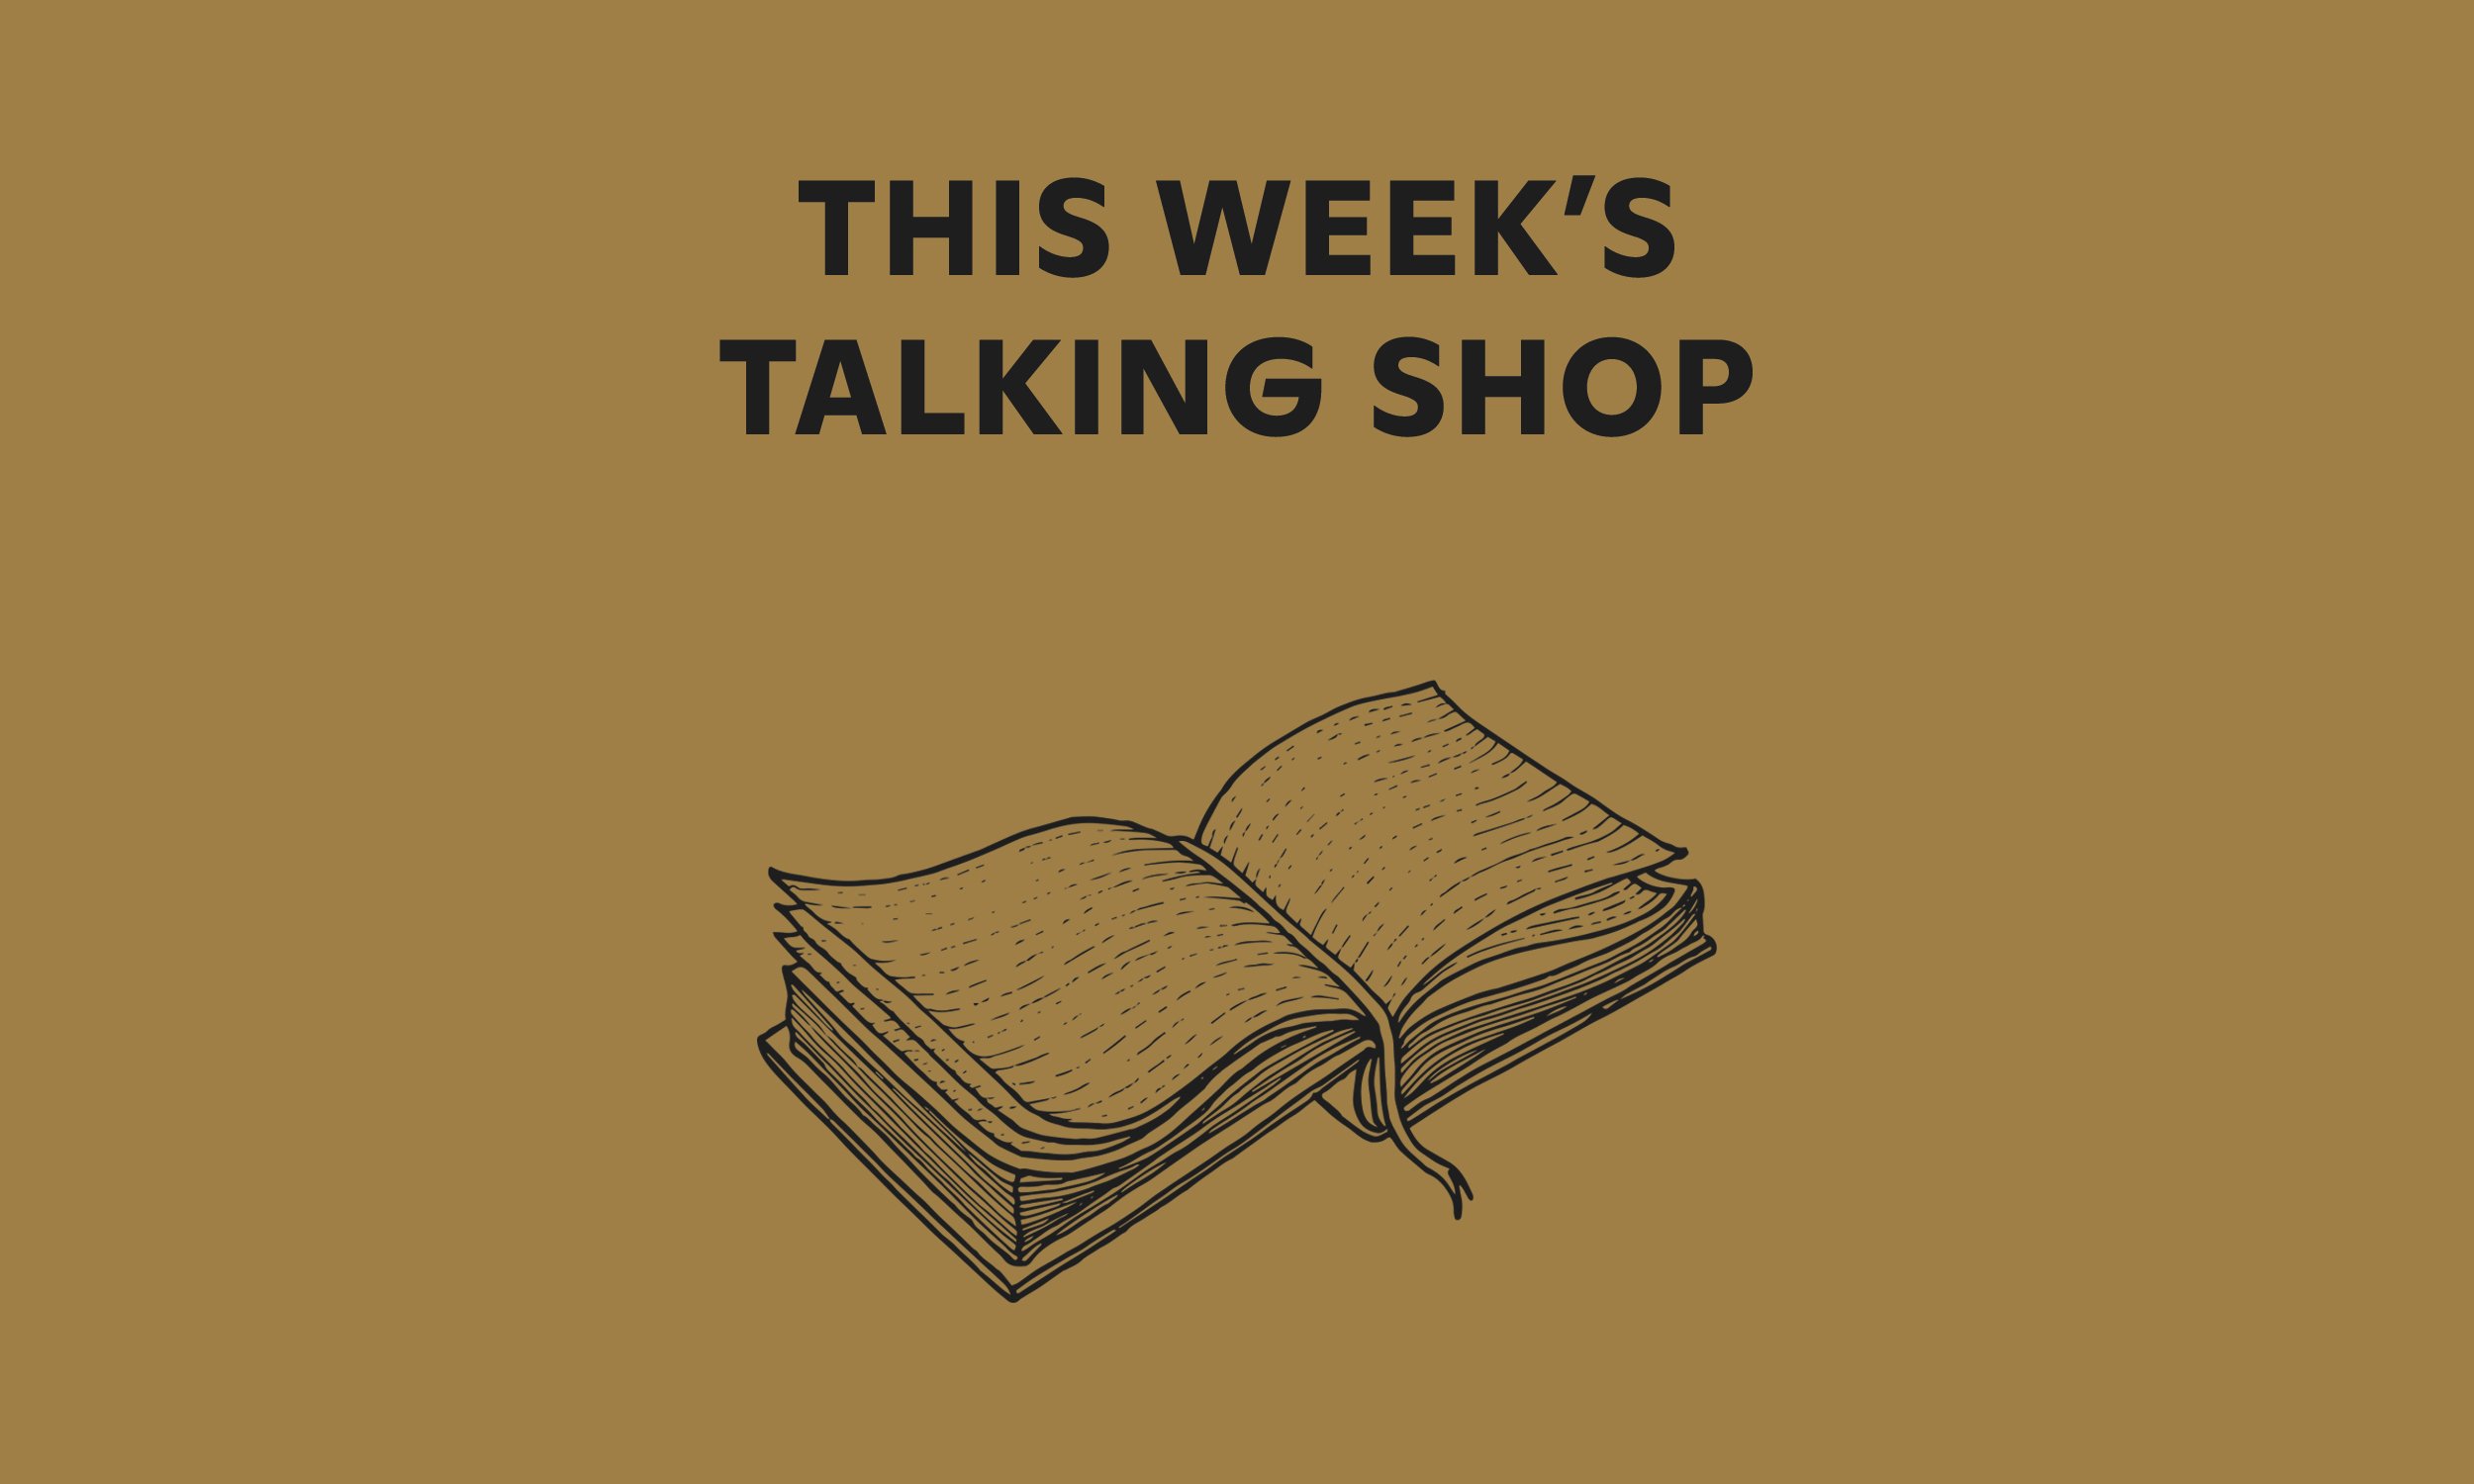 Talking Shop: 1 Peter 4:12-19; 5:6-11 (Easter 7, Series A)